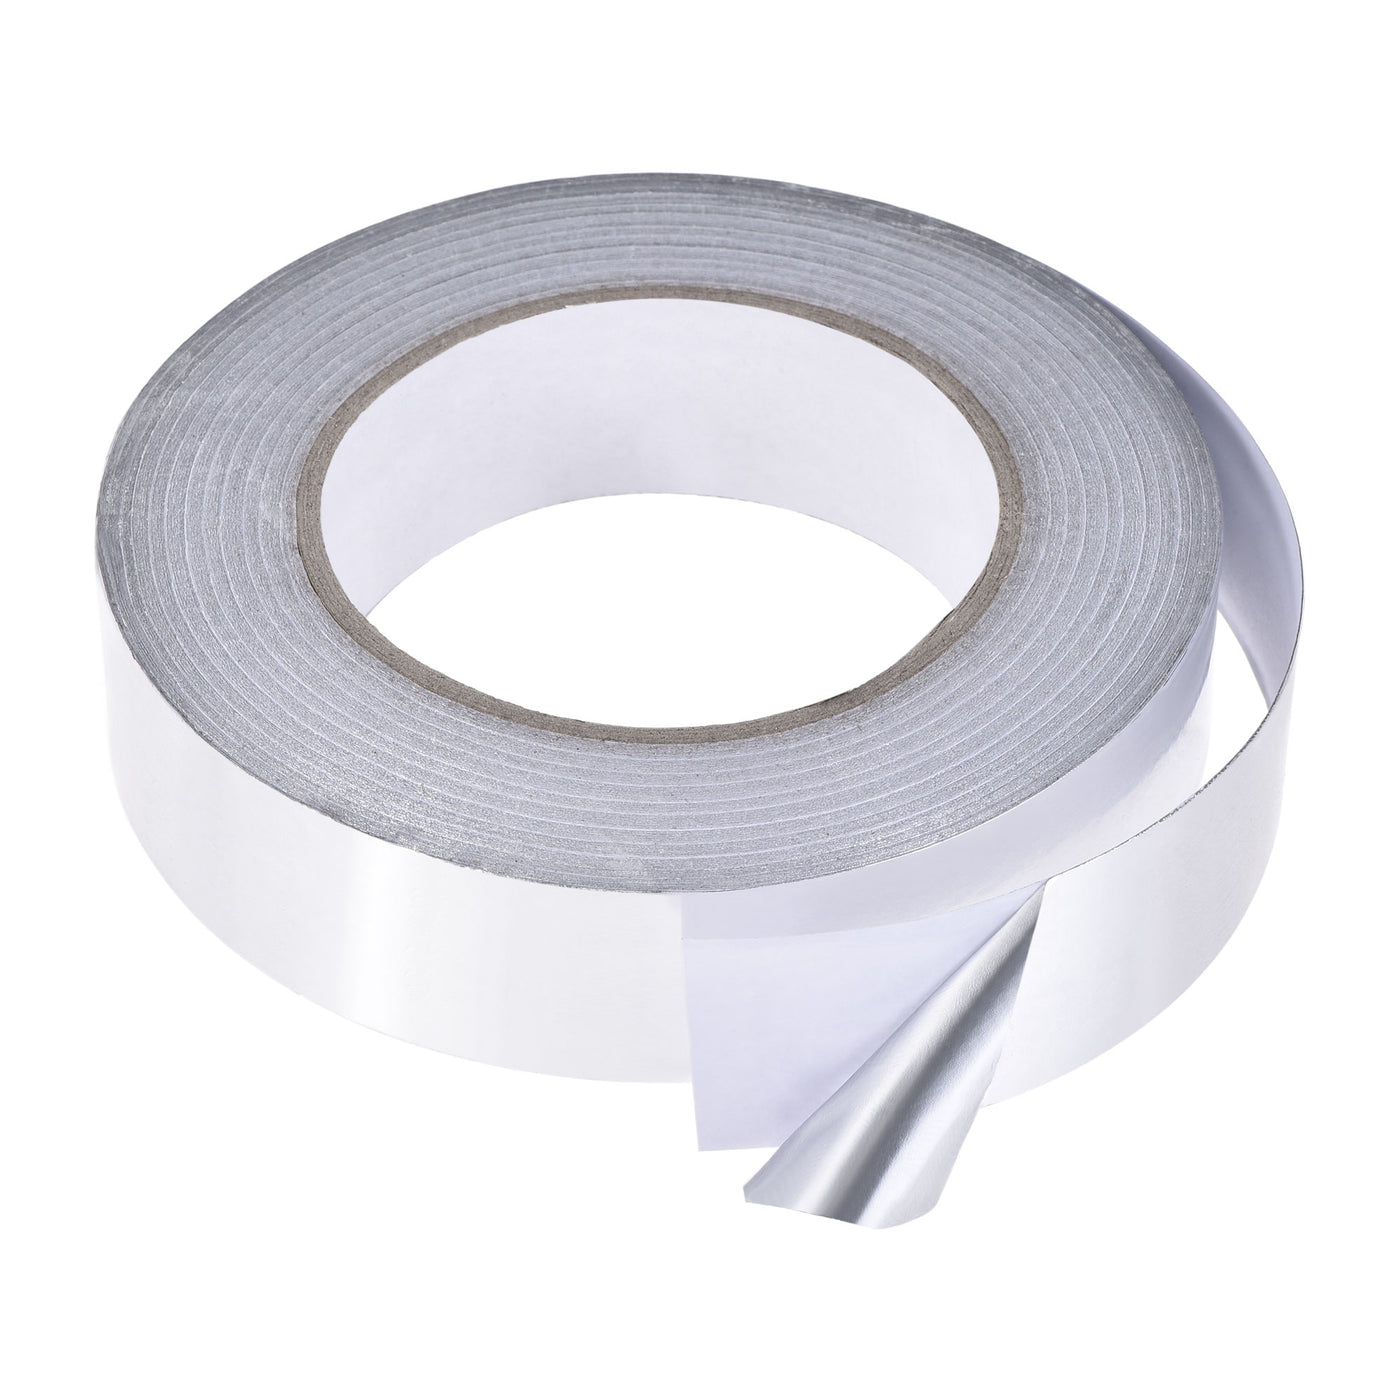 uxcell Uxcell Aluminum Foil Tape, 30mmx50m Self-adhesive Waterproof High Temperature Sealing Tapes for HVAC Duct Pipe Insulation